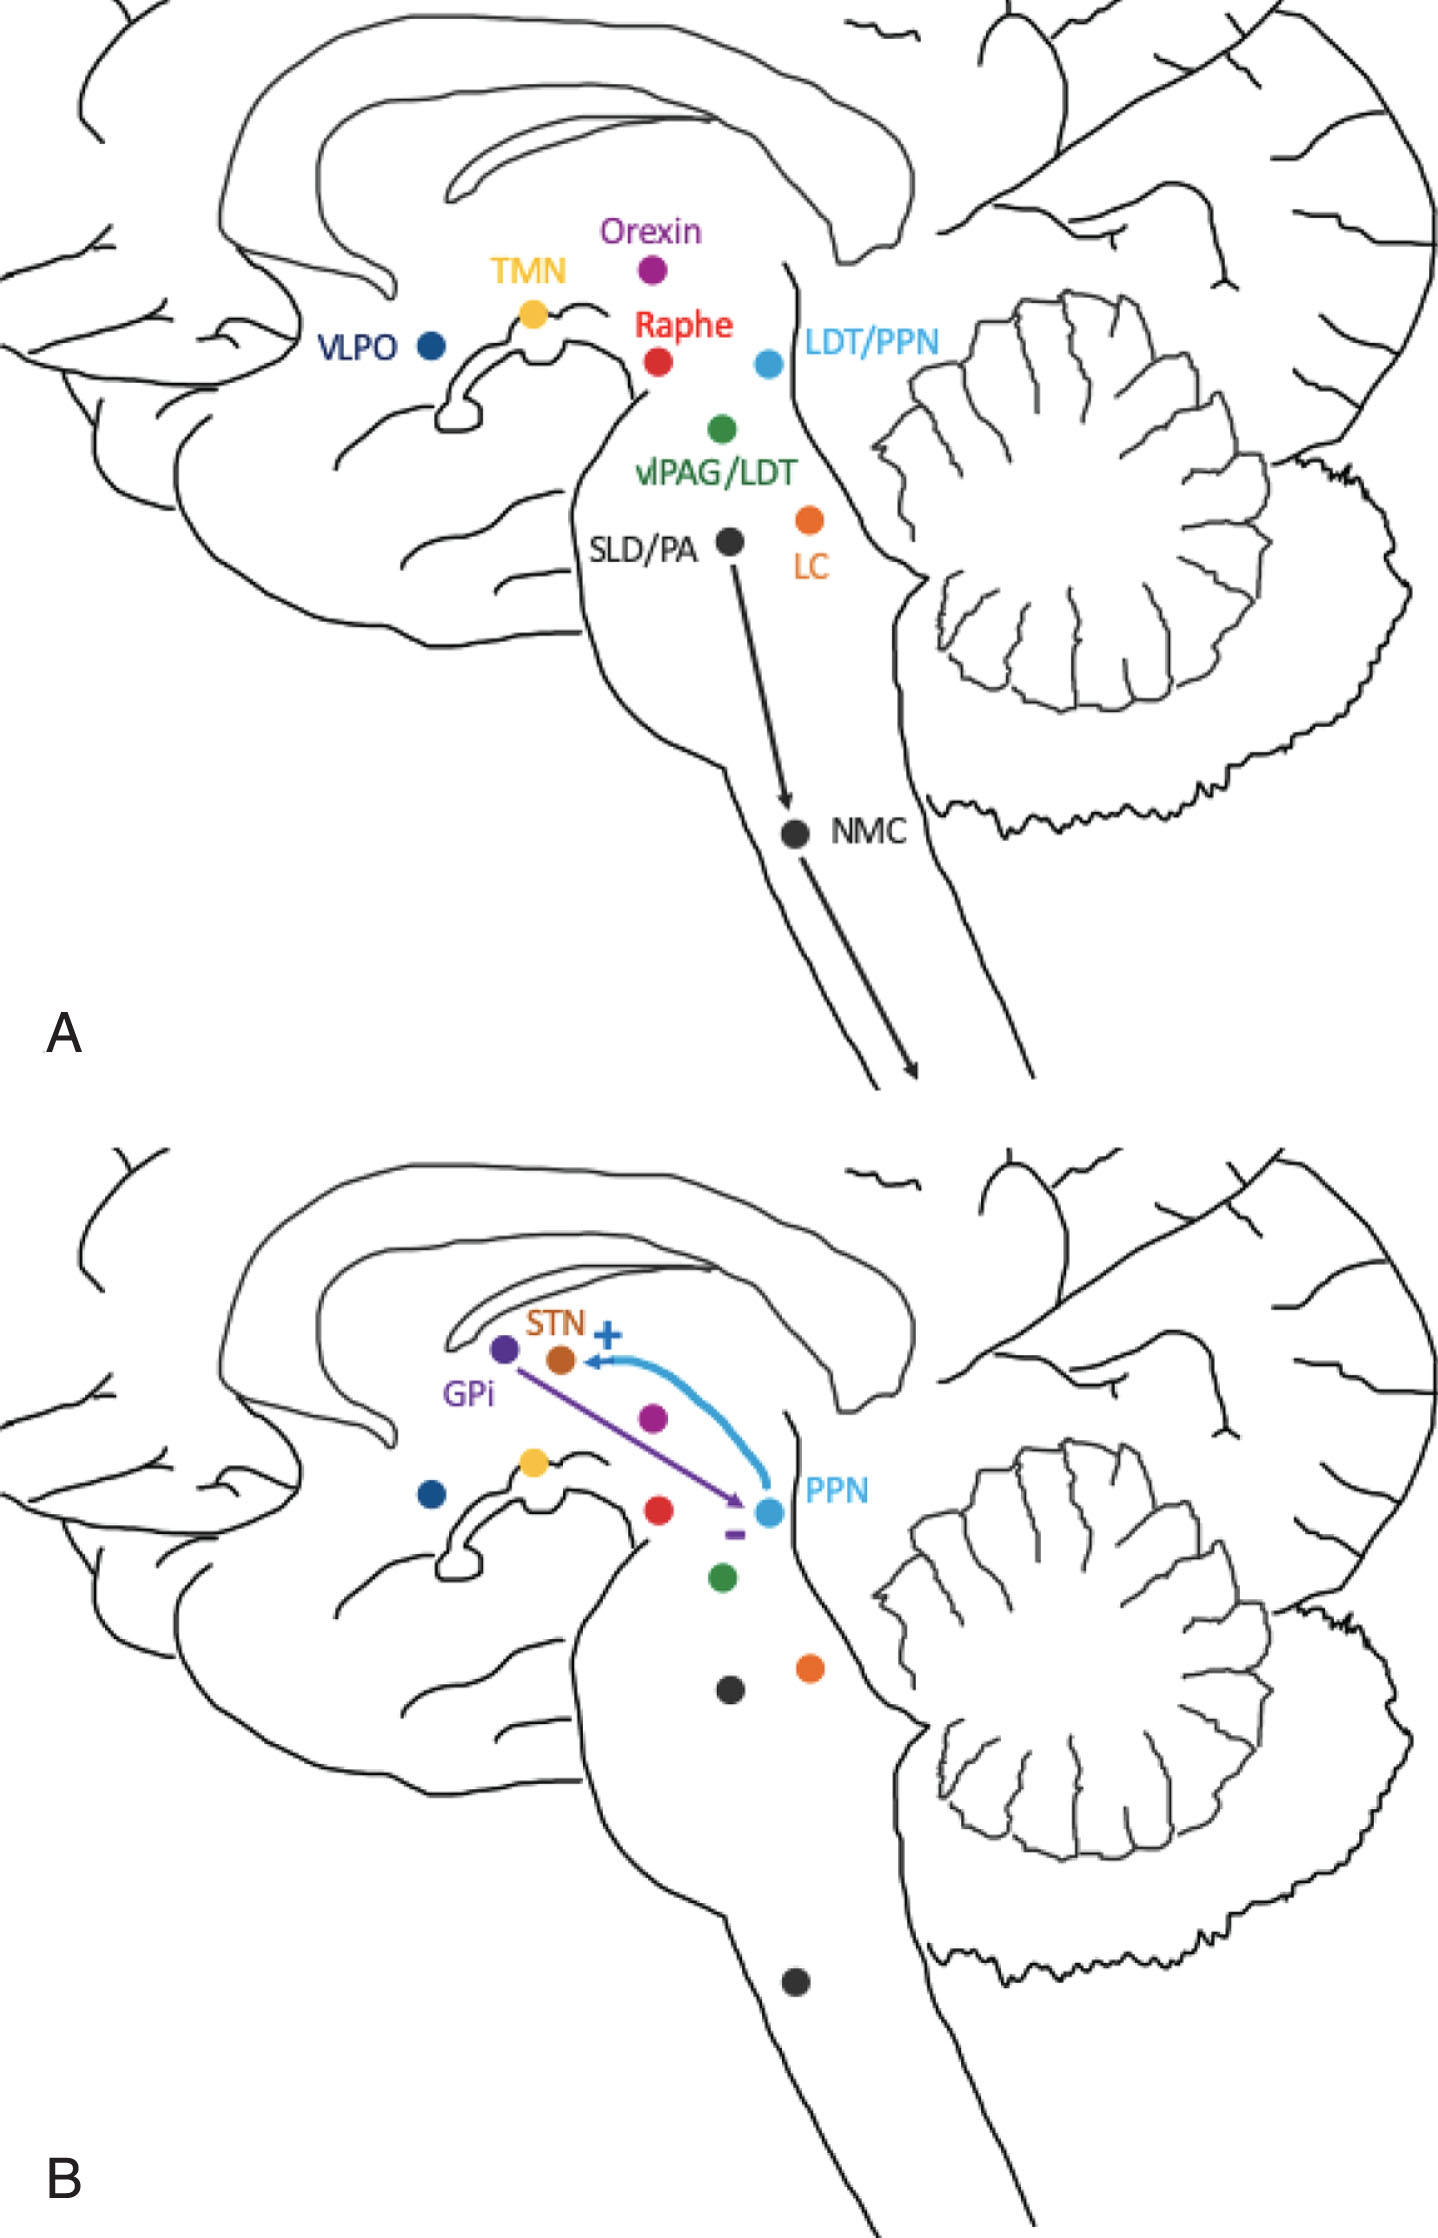 Areas of sleep-wake control and proposed connection to DBS targets: STN and GPi. A) Wakefulness is promoted by the excitatory interaction between orexin, locus coeruleus (LC), precoeruleus area (PA), raphe nucleus, ventral periaqueductal gray matter (vlPAG), tuberomammillary nucleus (TMN) and pedunculopontine tegmental nuclei (PPN). Sleep is induced by the ventrolateral preoptic area (VLPO) which inhibits the above nuclei. During REM, the sublateral dorsal nucleus (SLD), PA and PPN inhibit the lateral pontine tegmentum (LPT) and vlPAG. The SLD and PA also inhibit spinal cord motor neurons via the nucleus magnocellularis (NMC) to promote REM atonia. B) The STN receives excitatory cholinergic projections from the PPN and may act as a relay for information regarding wakefulness and REM sleep. The GPi sends inhibitory GABA projections to the PPN, likely reducing wakefulness and suppressing REM sleep.